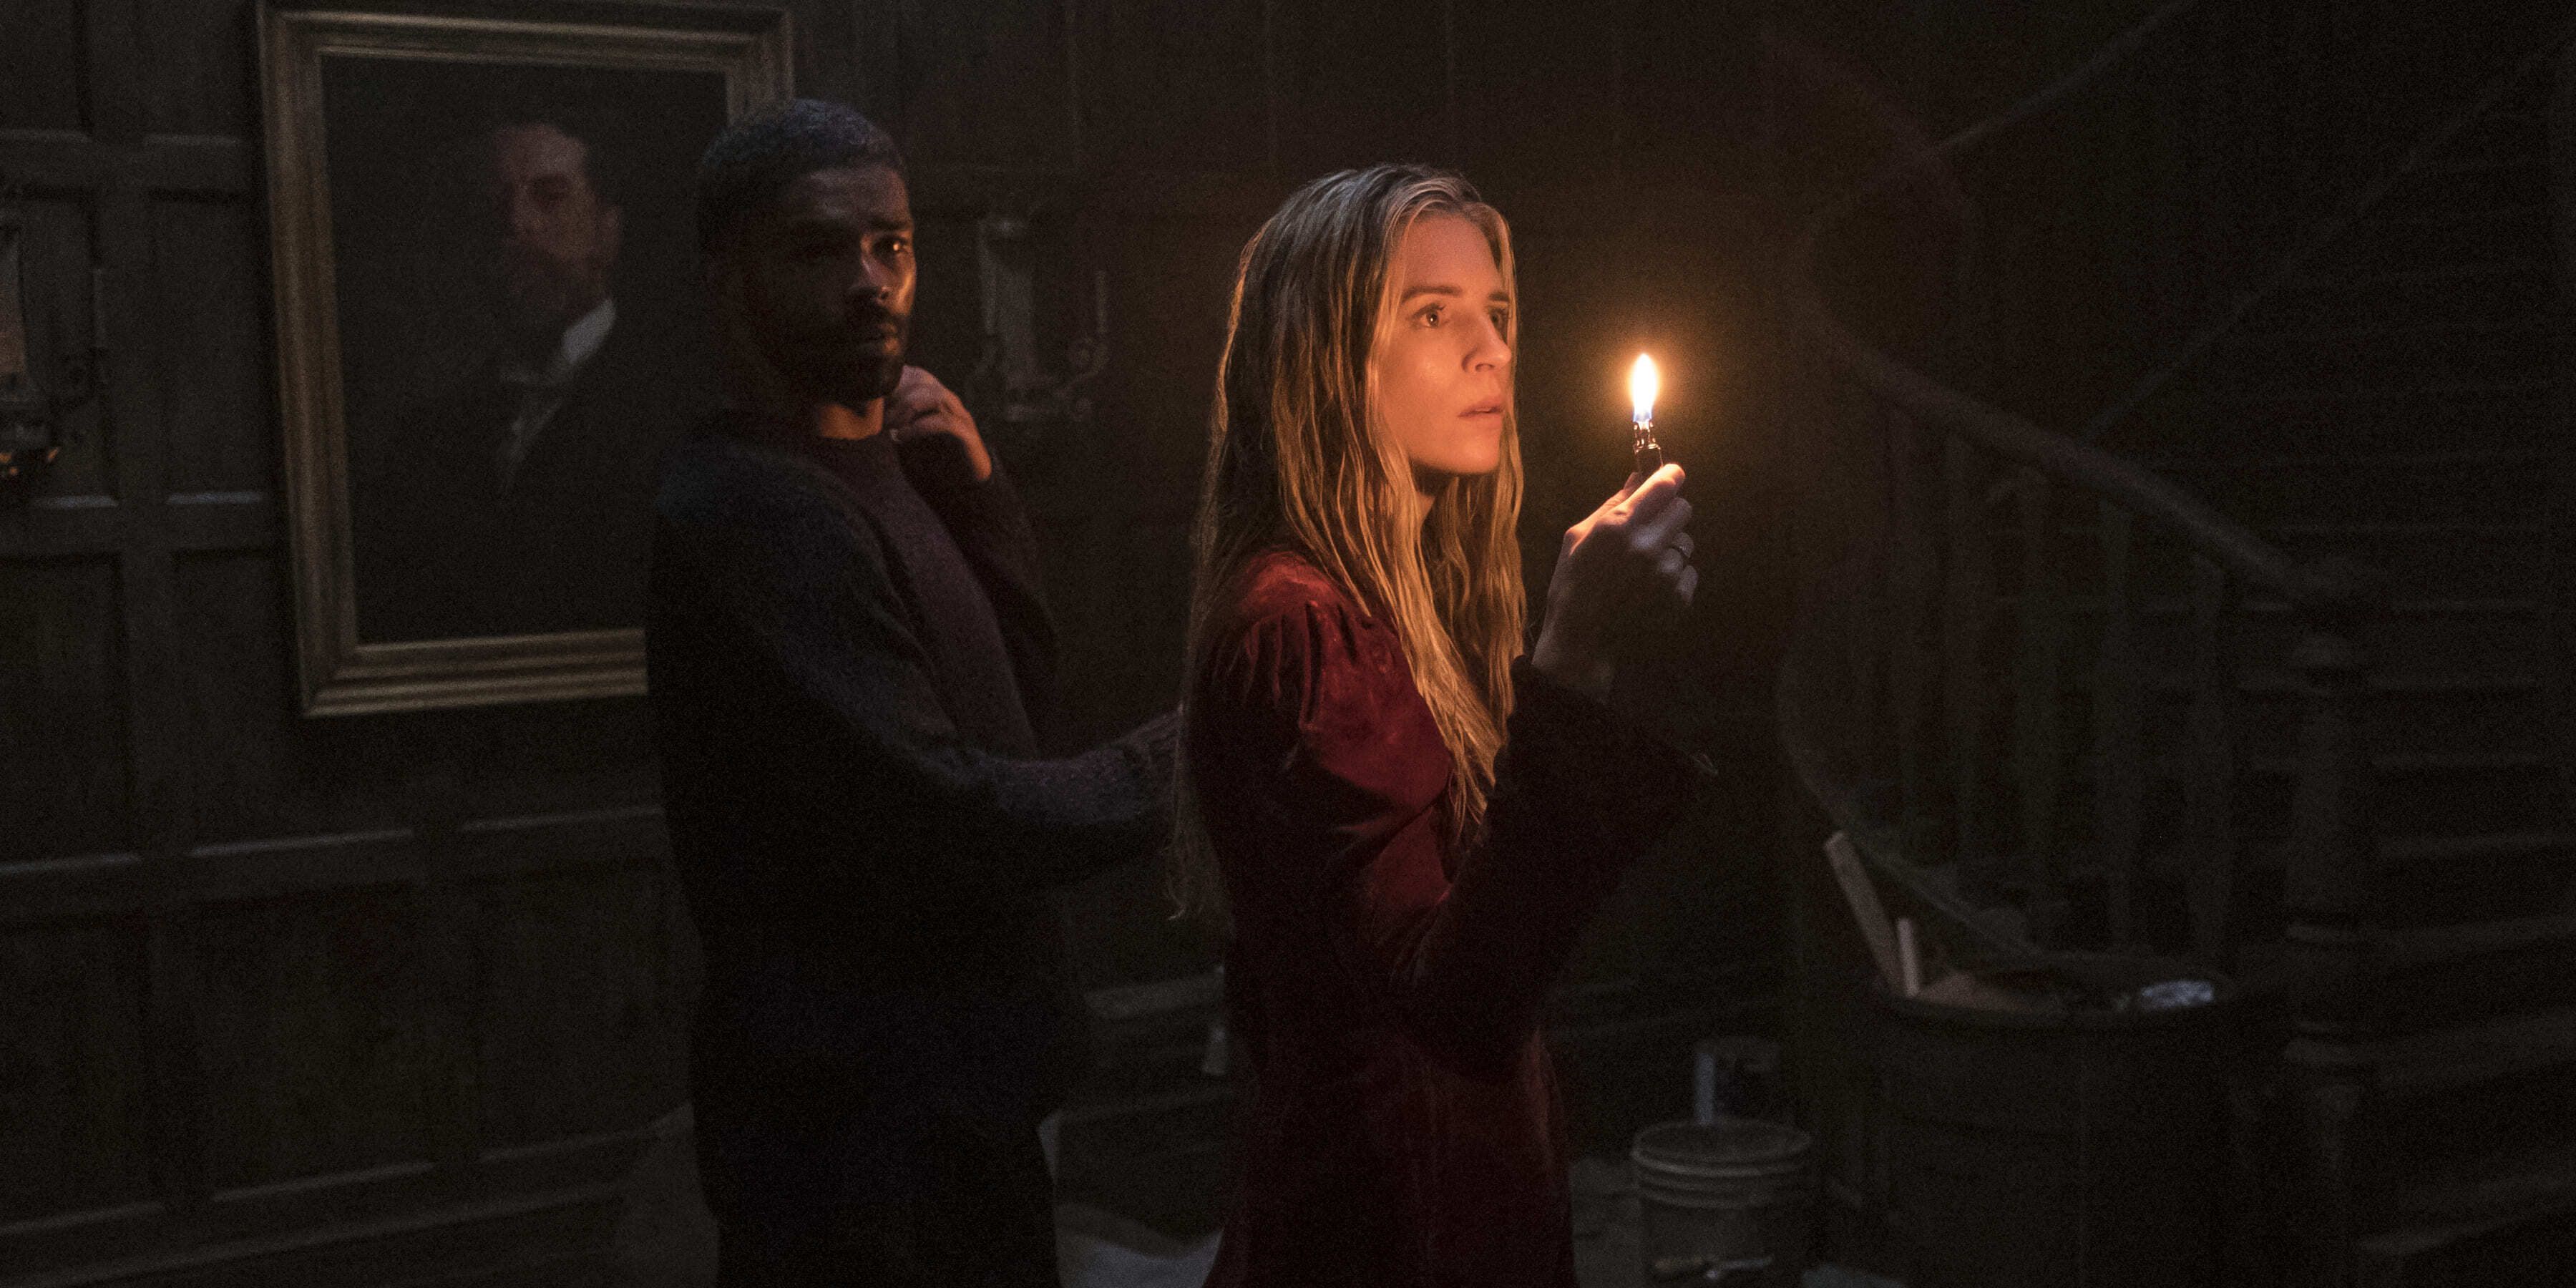 Prairie and Karim holding up a candle in The OA